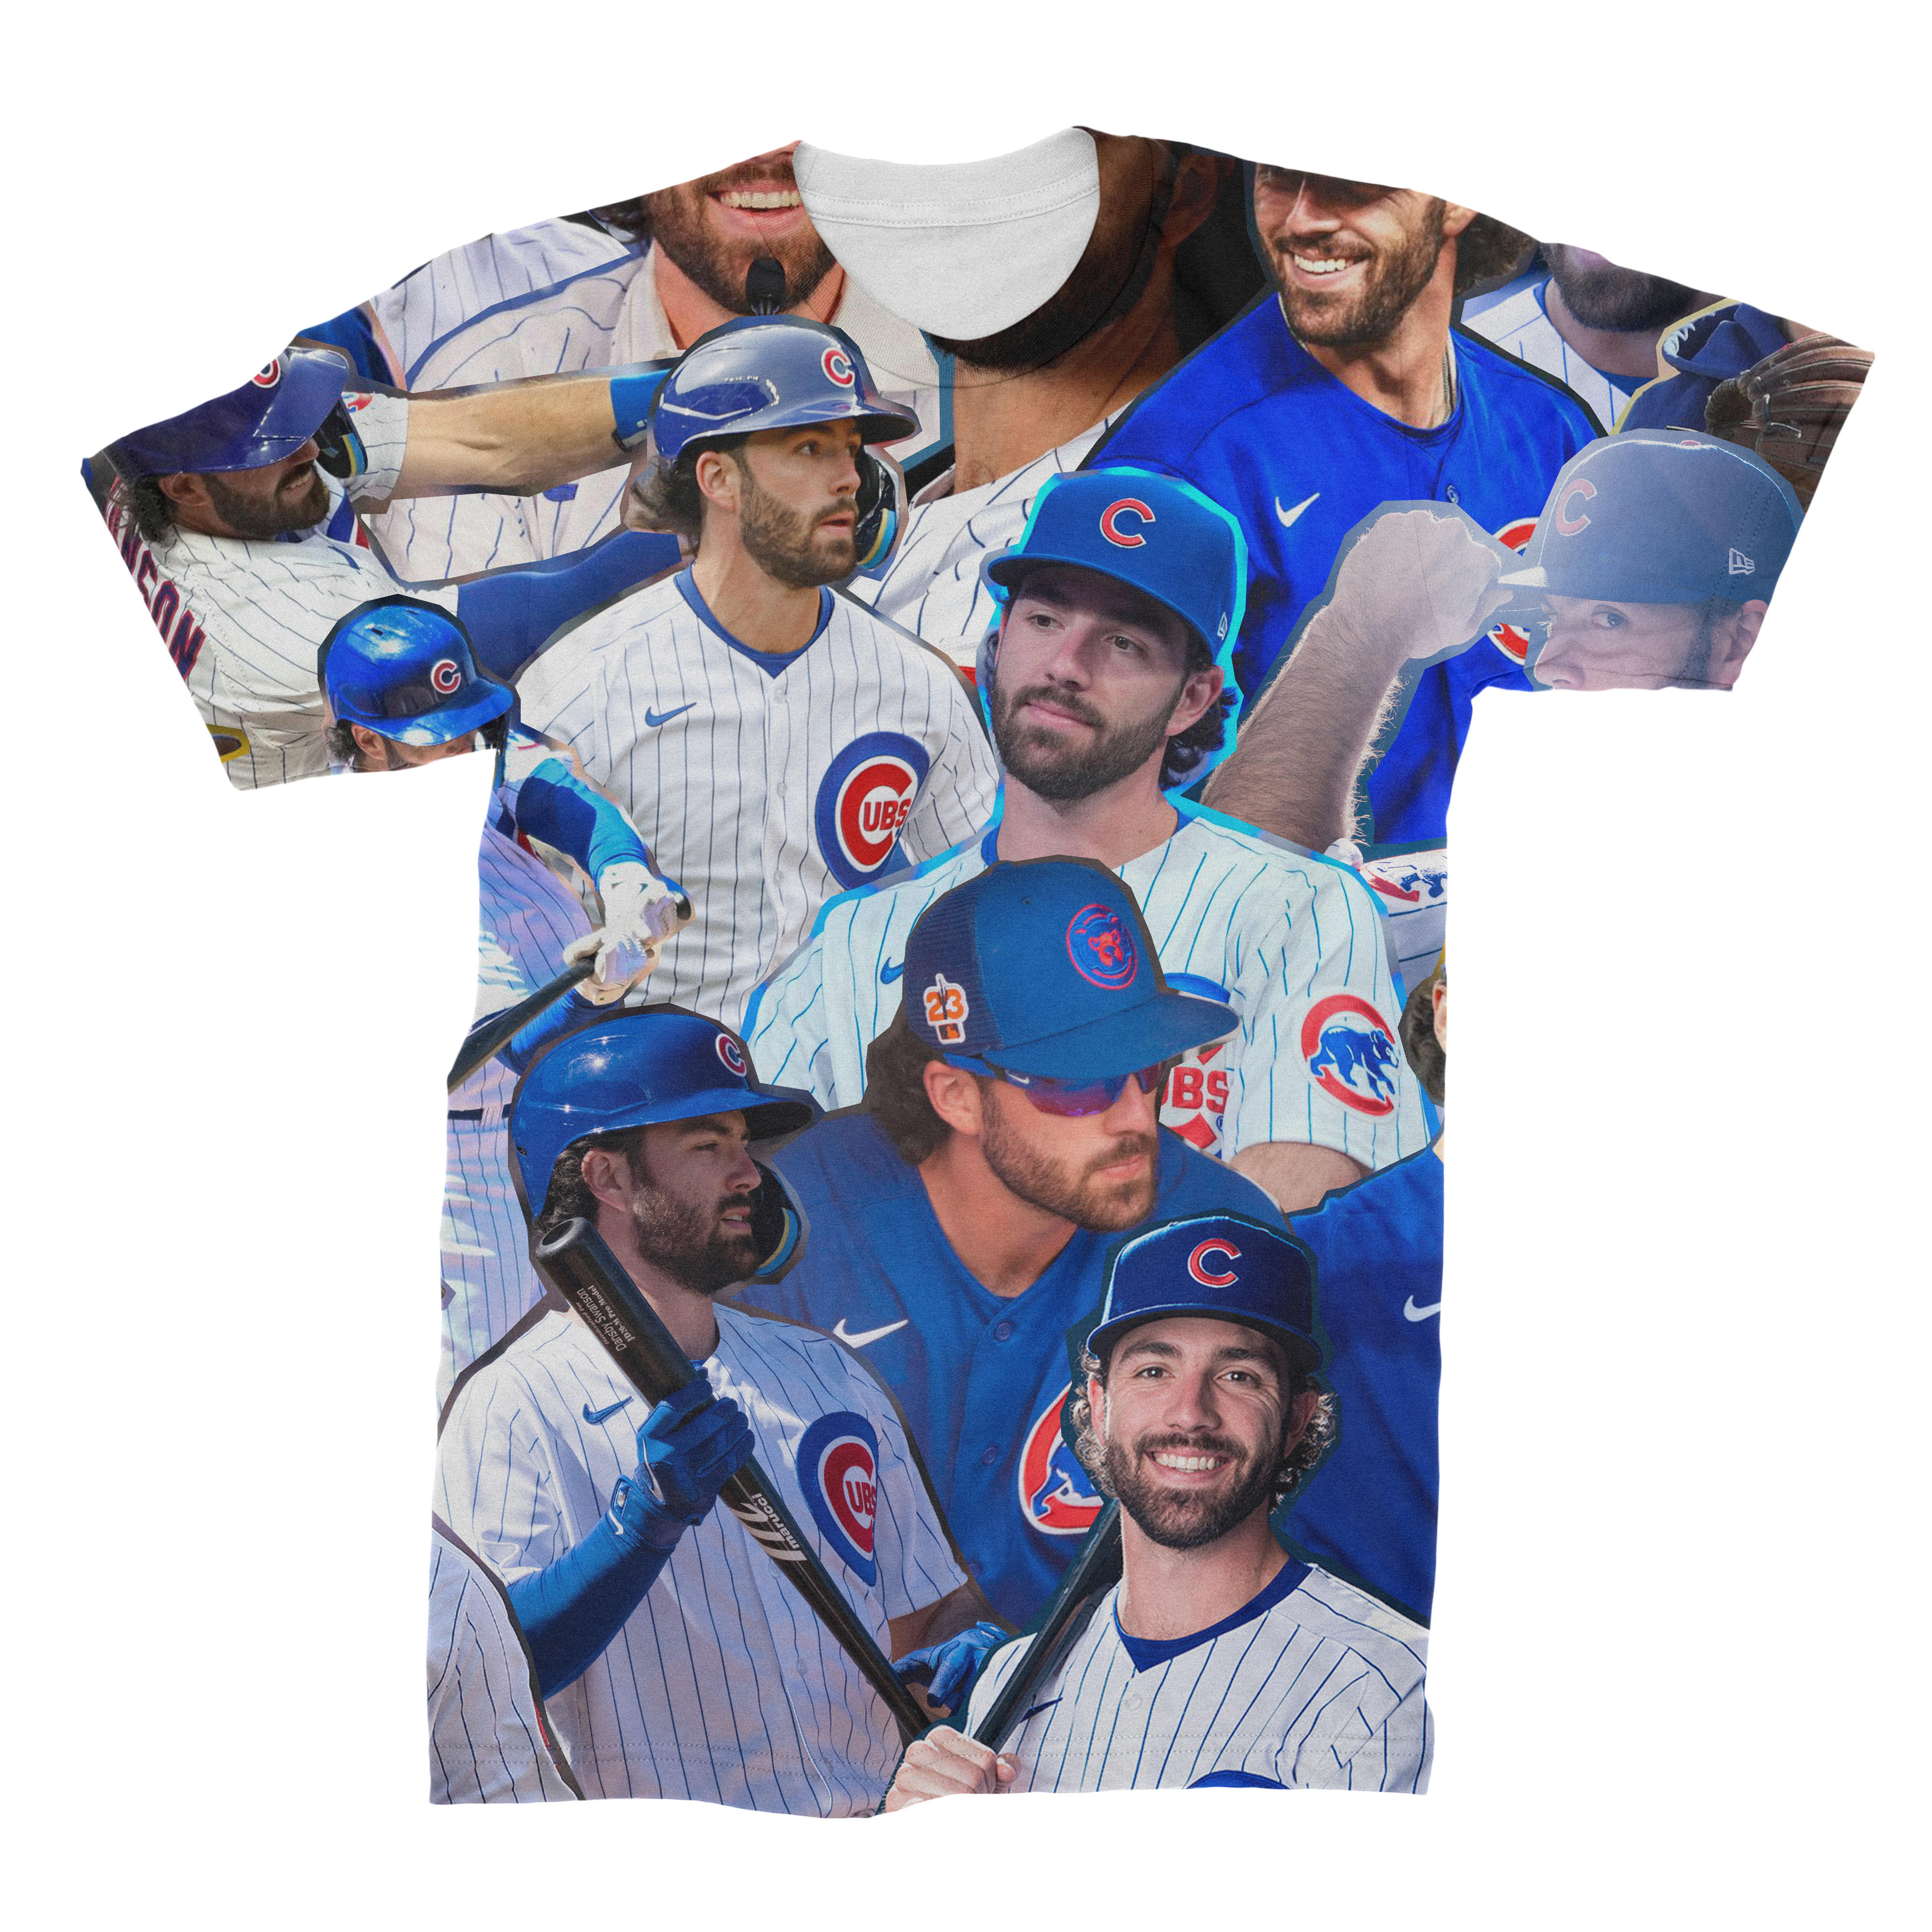 chicago cubs swanson jersey